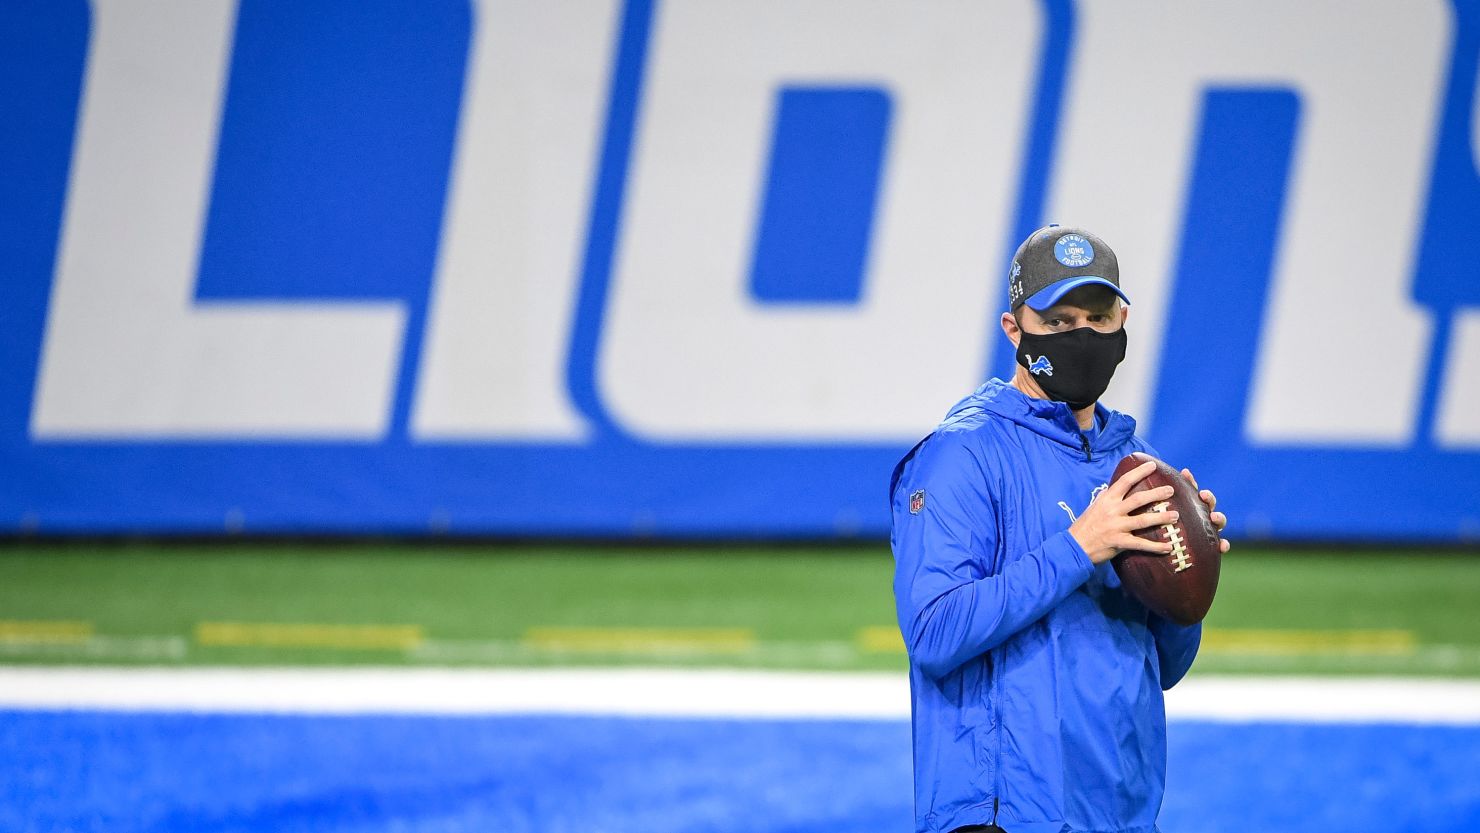 Detroit Lions interim coach Darrell Bevell  will be forced to sit out Detroit's game against the Tampa Bay Buccaneers because he is a close contact of someone who tested positive for Covid-19.